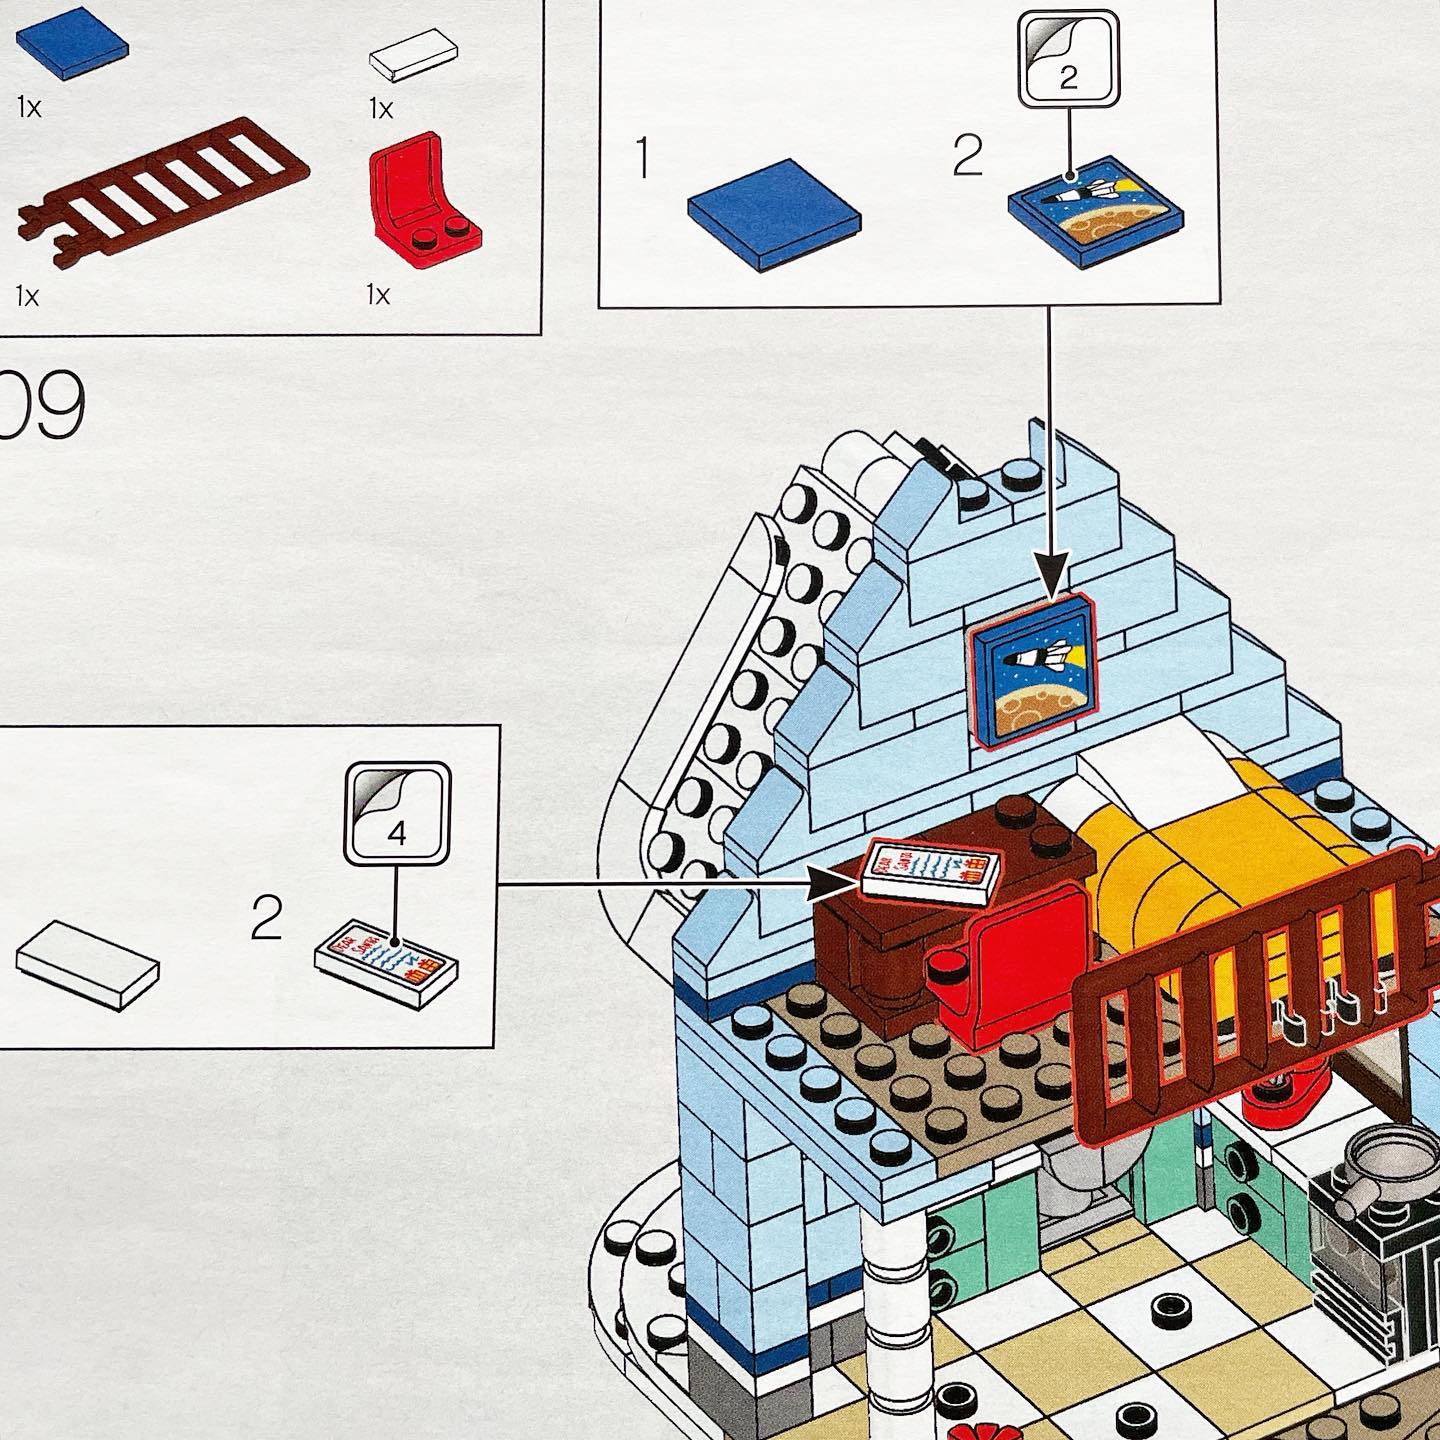 Clear. Usable. @lego building instructions can teach designers a lot about depicting sequences.